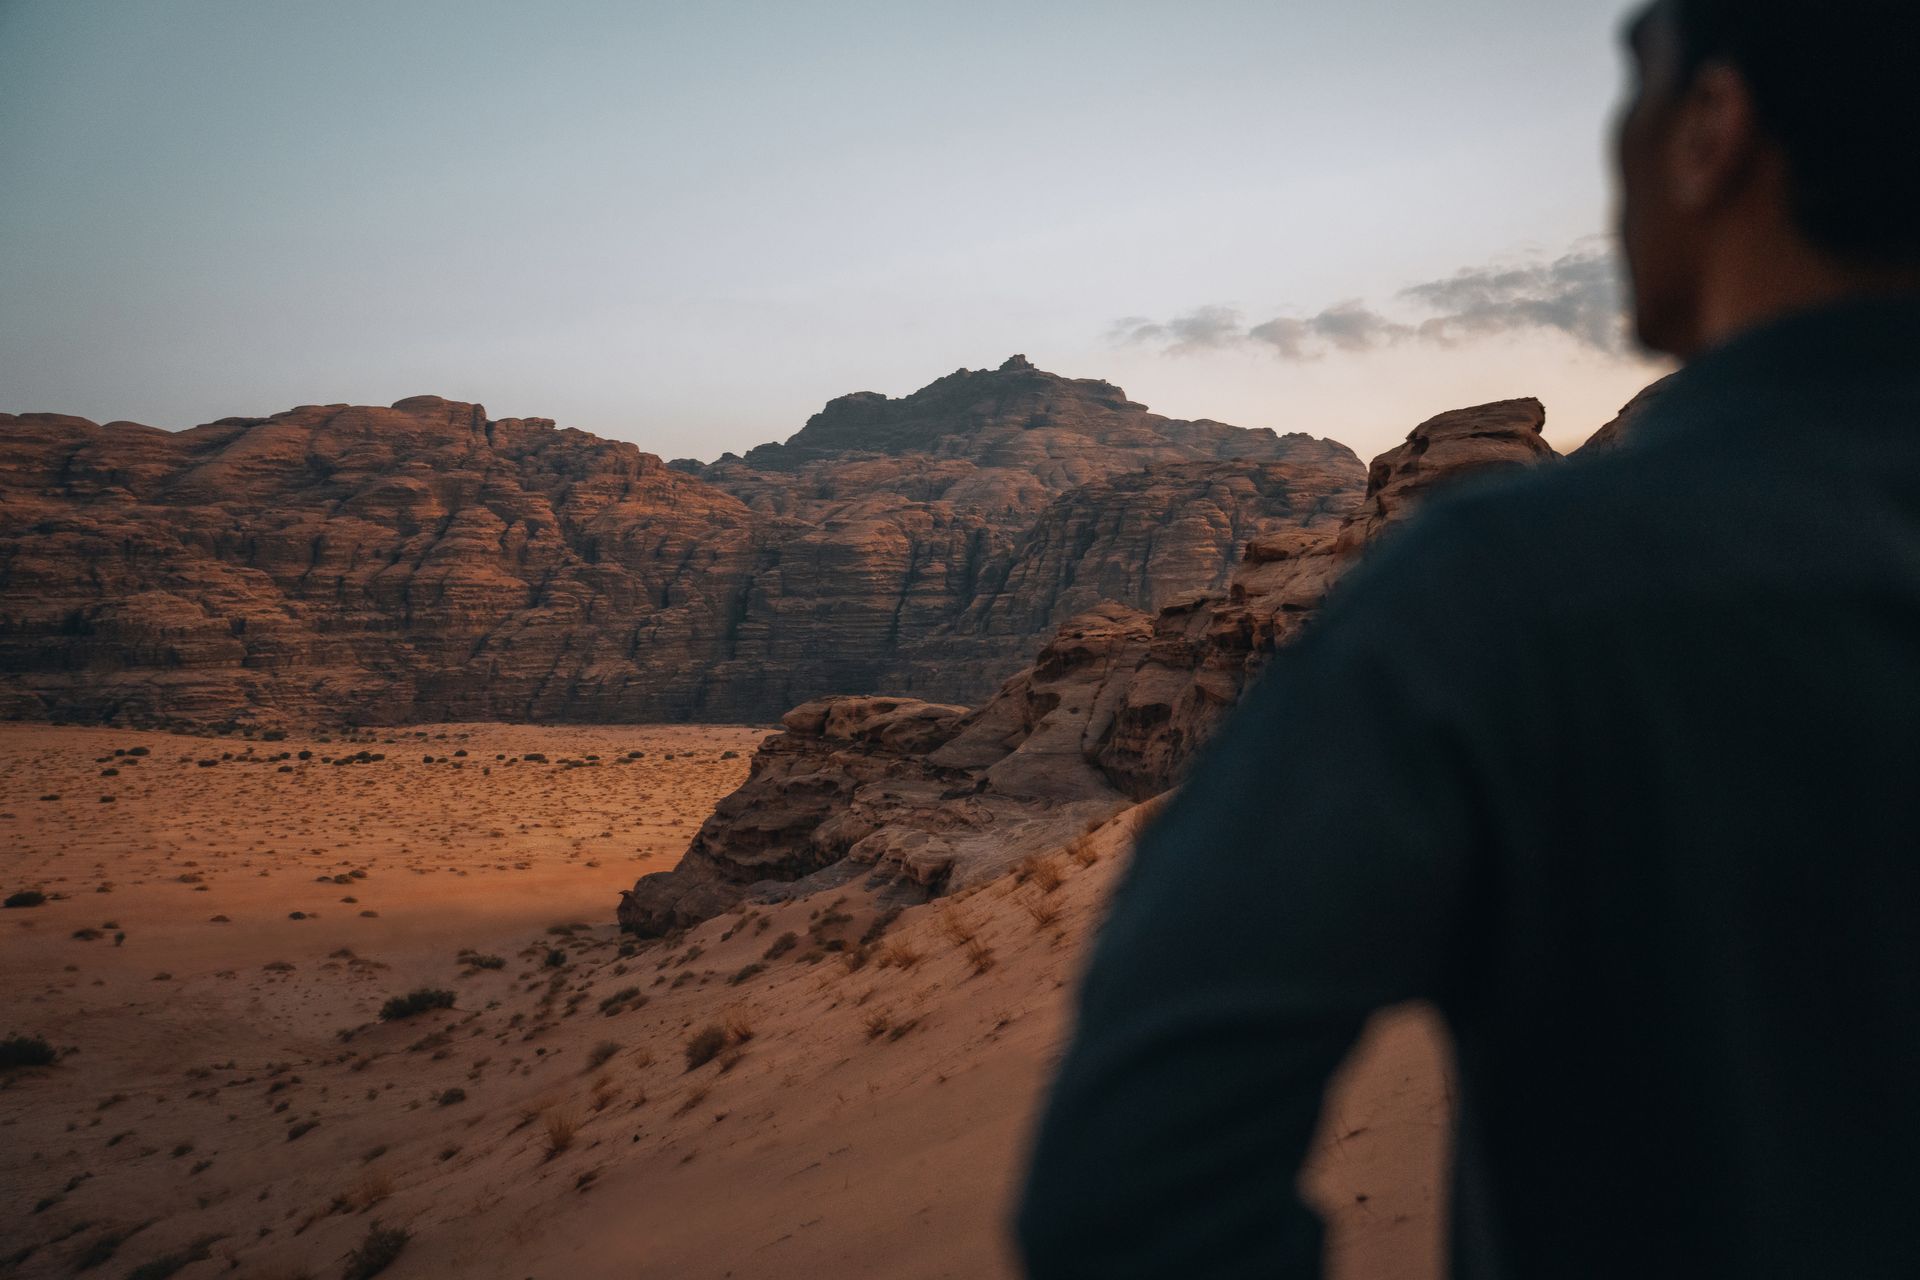 A man standing and looking out over the dessert in the head with mountains in the background